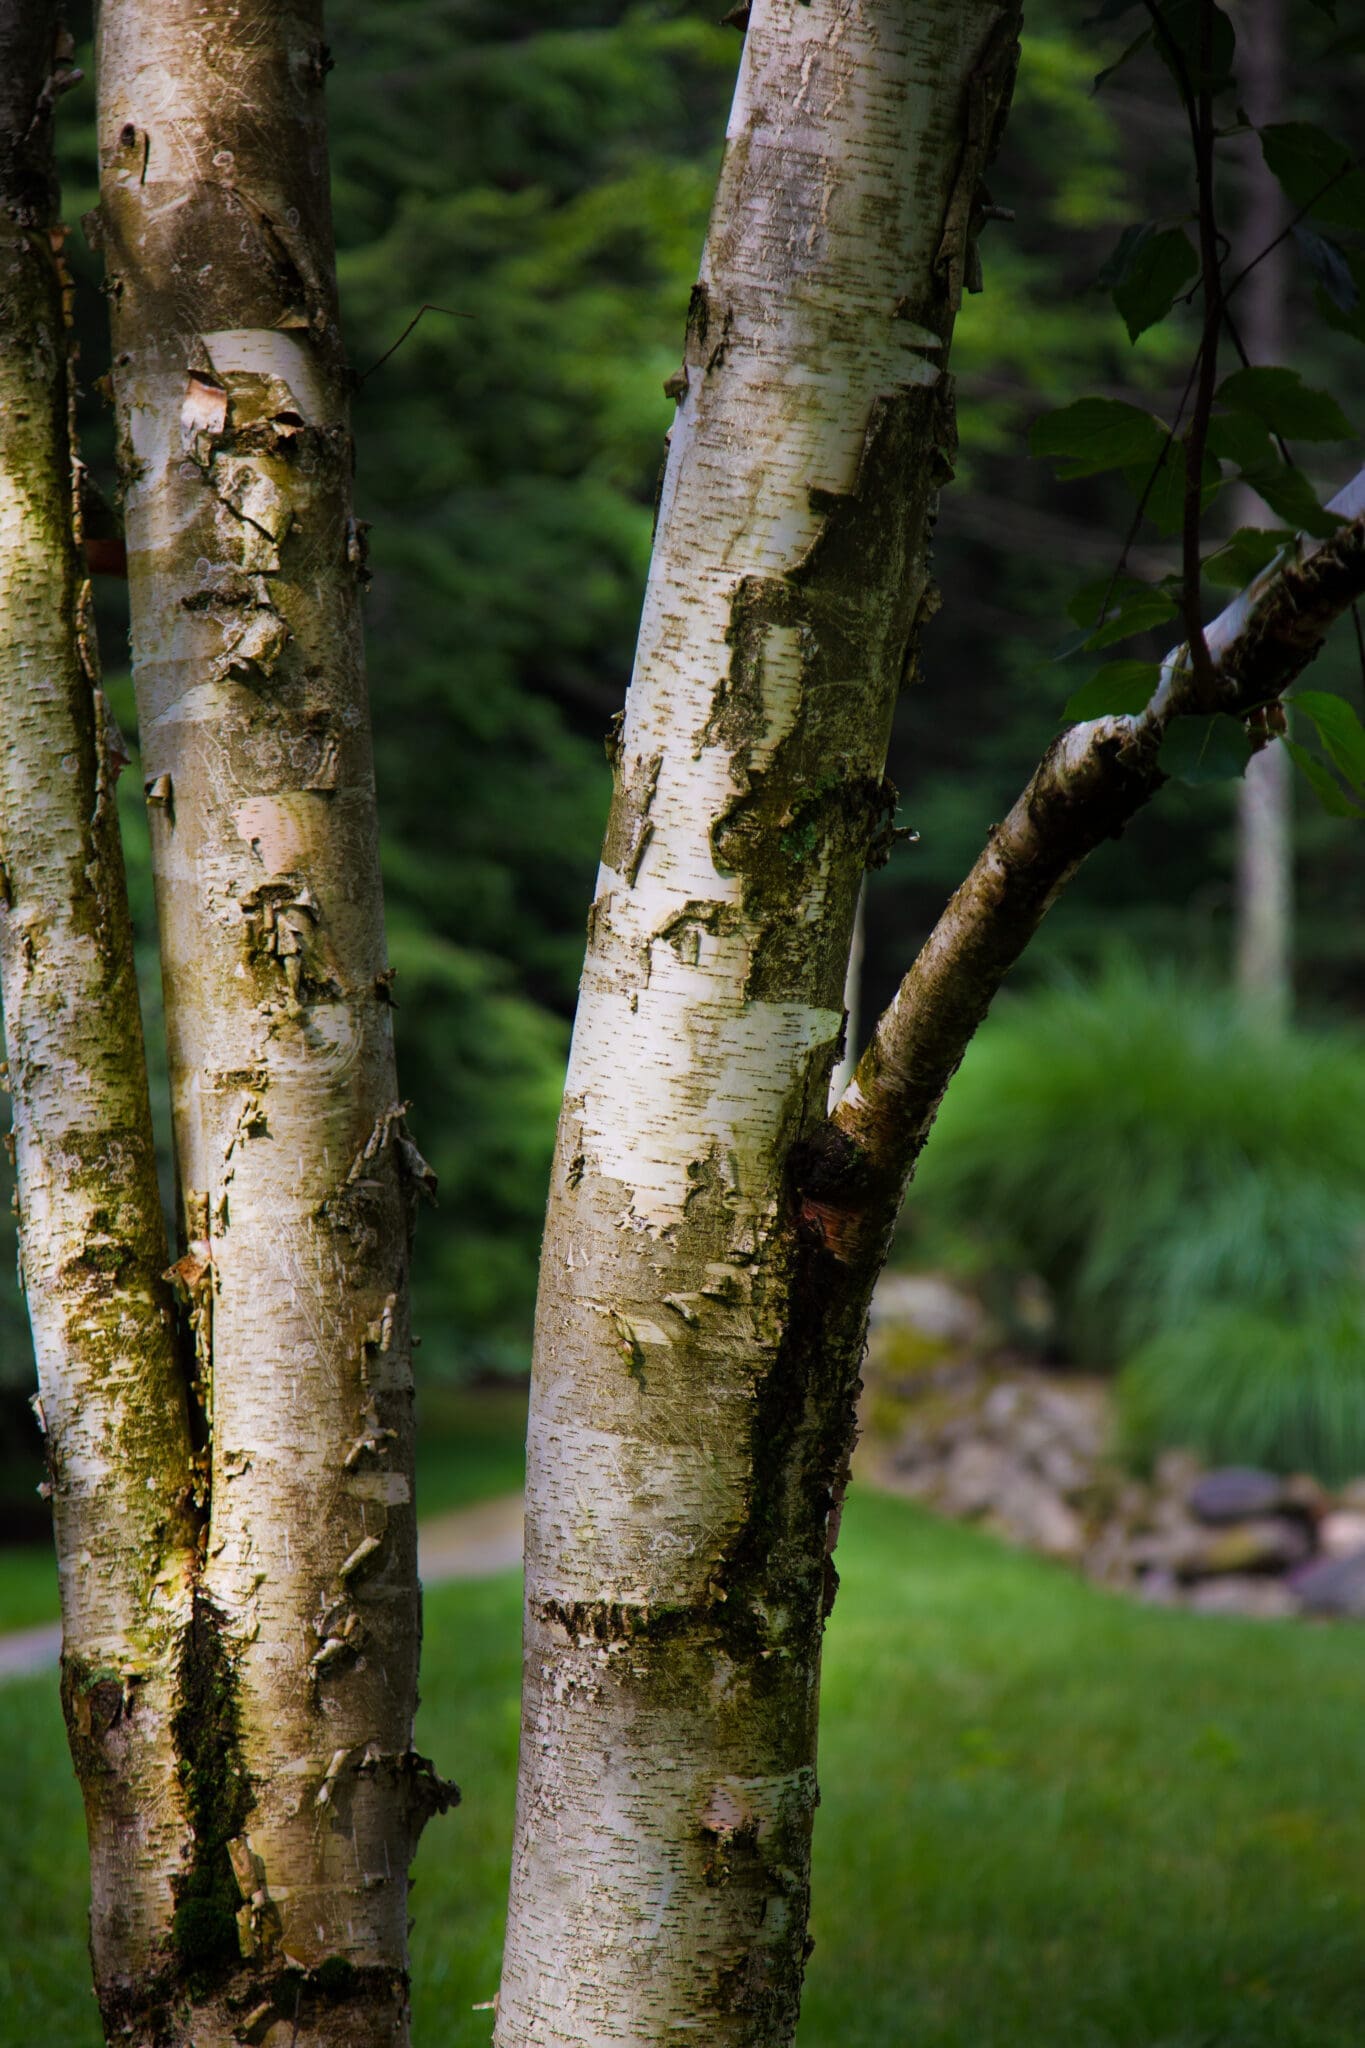 A photo of a birch tree with grass and landscaping in the background.